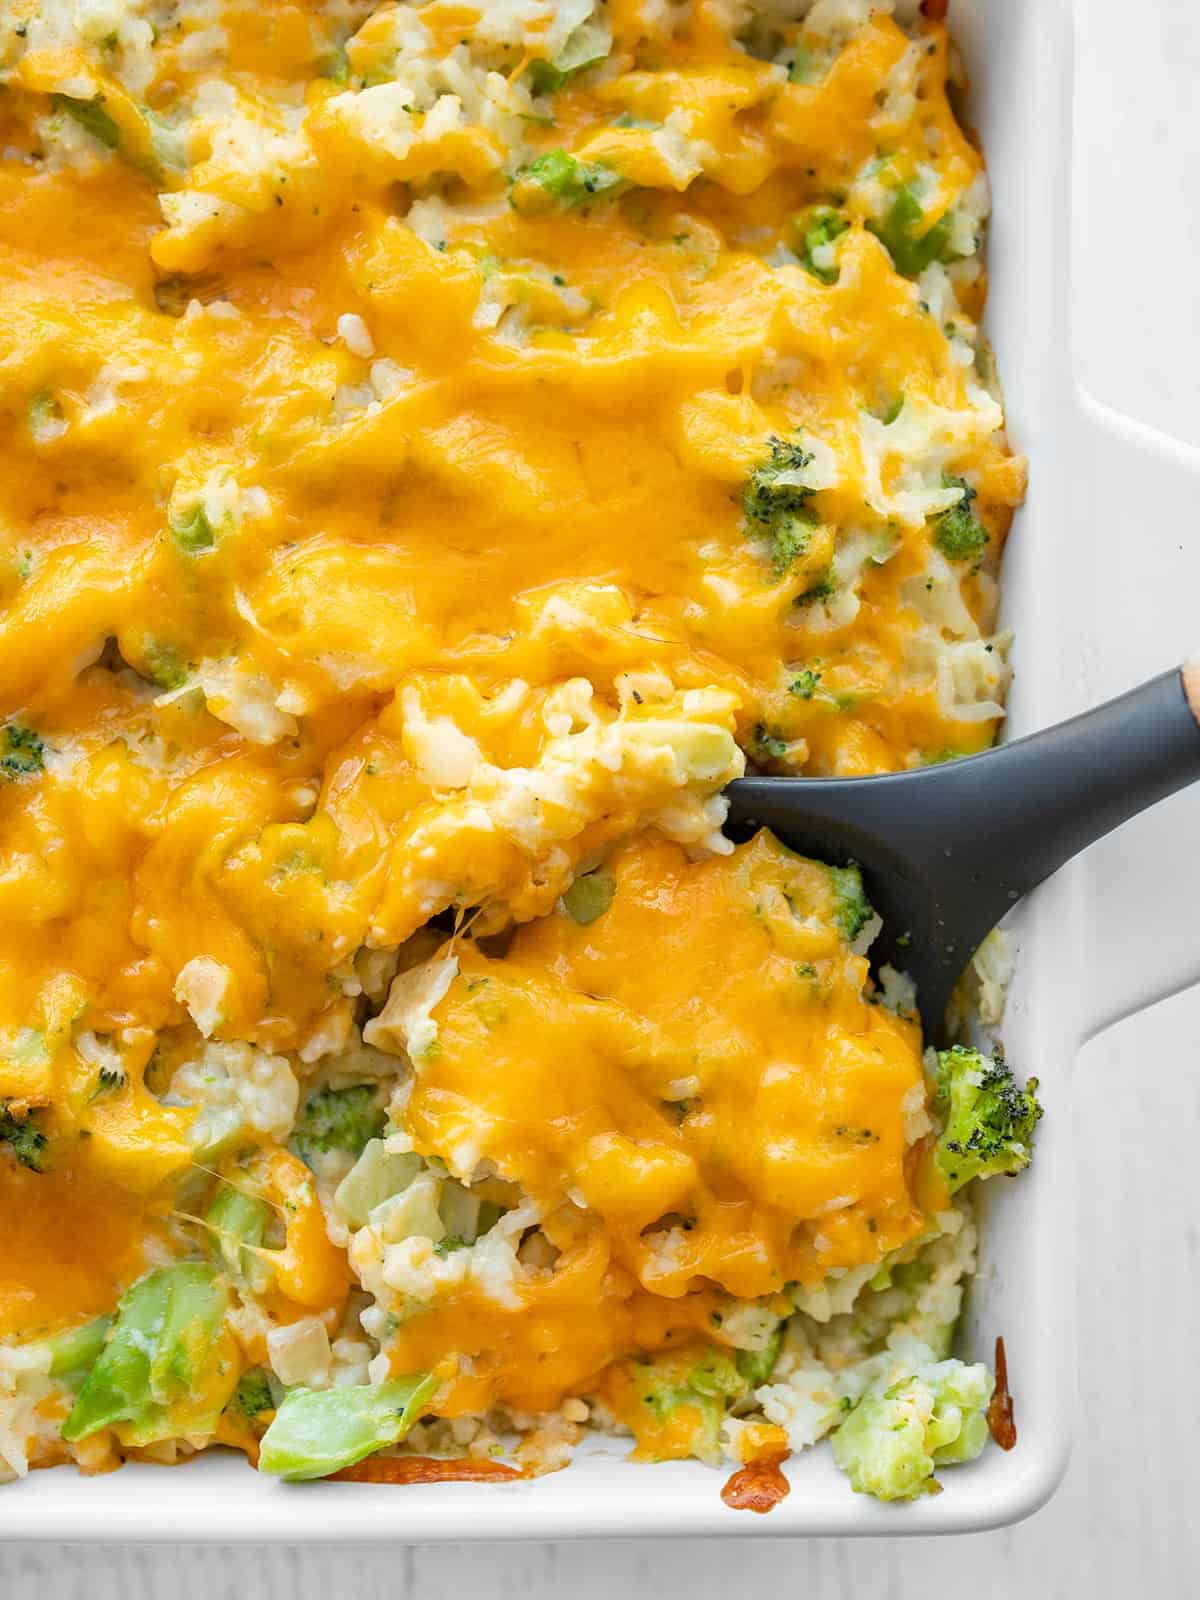 Overhead view of a large spoon scooping some broccoli cheddar casserole from the dish